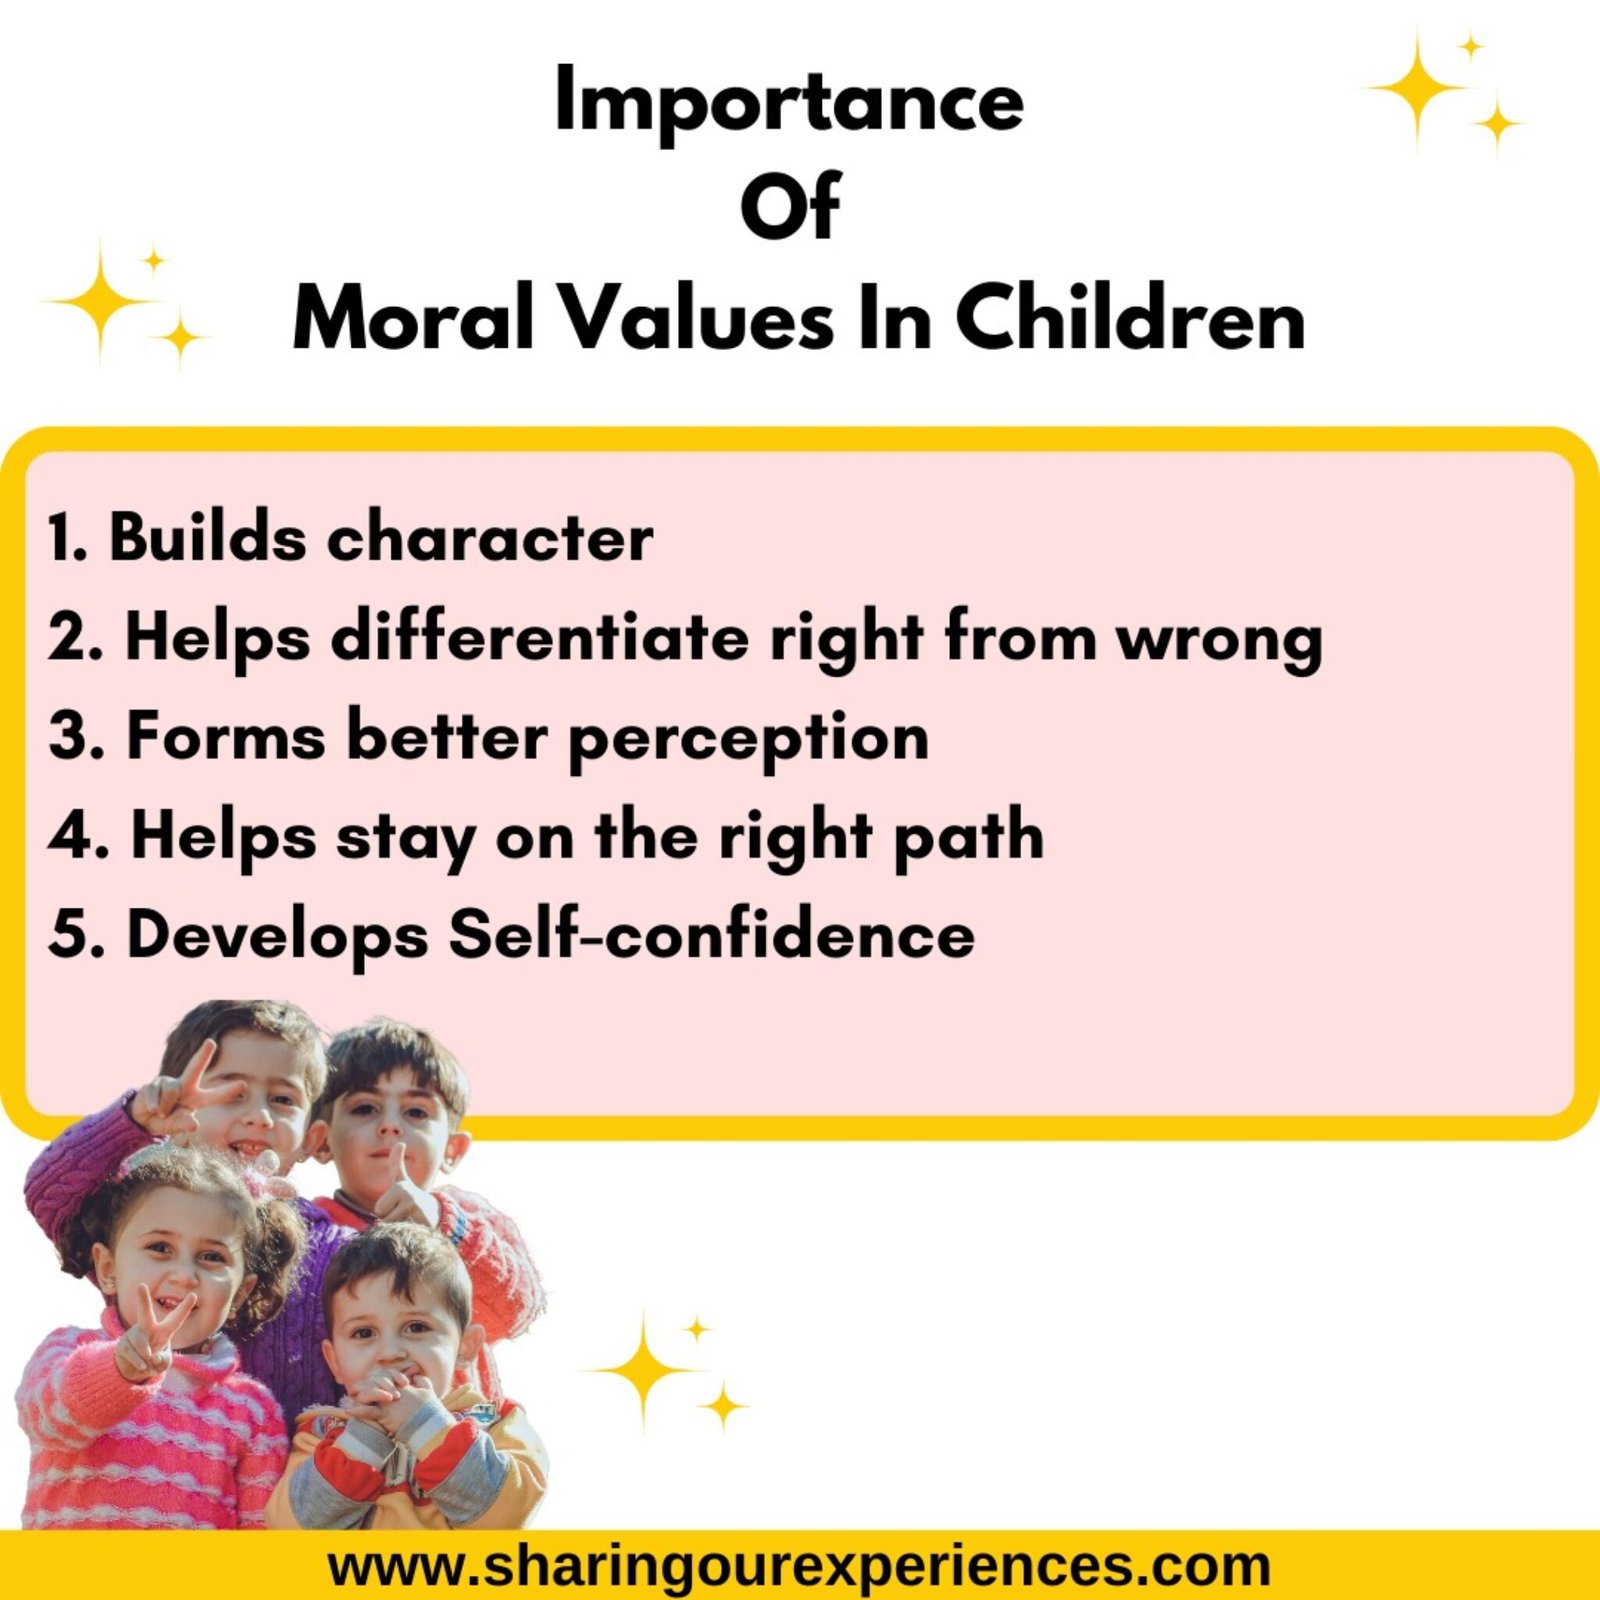 challenges in teaching moral education